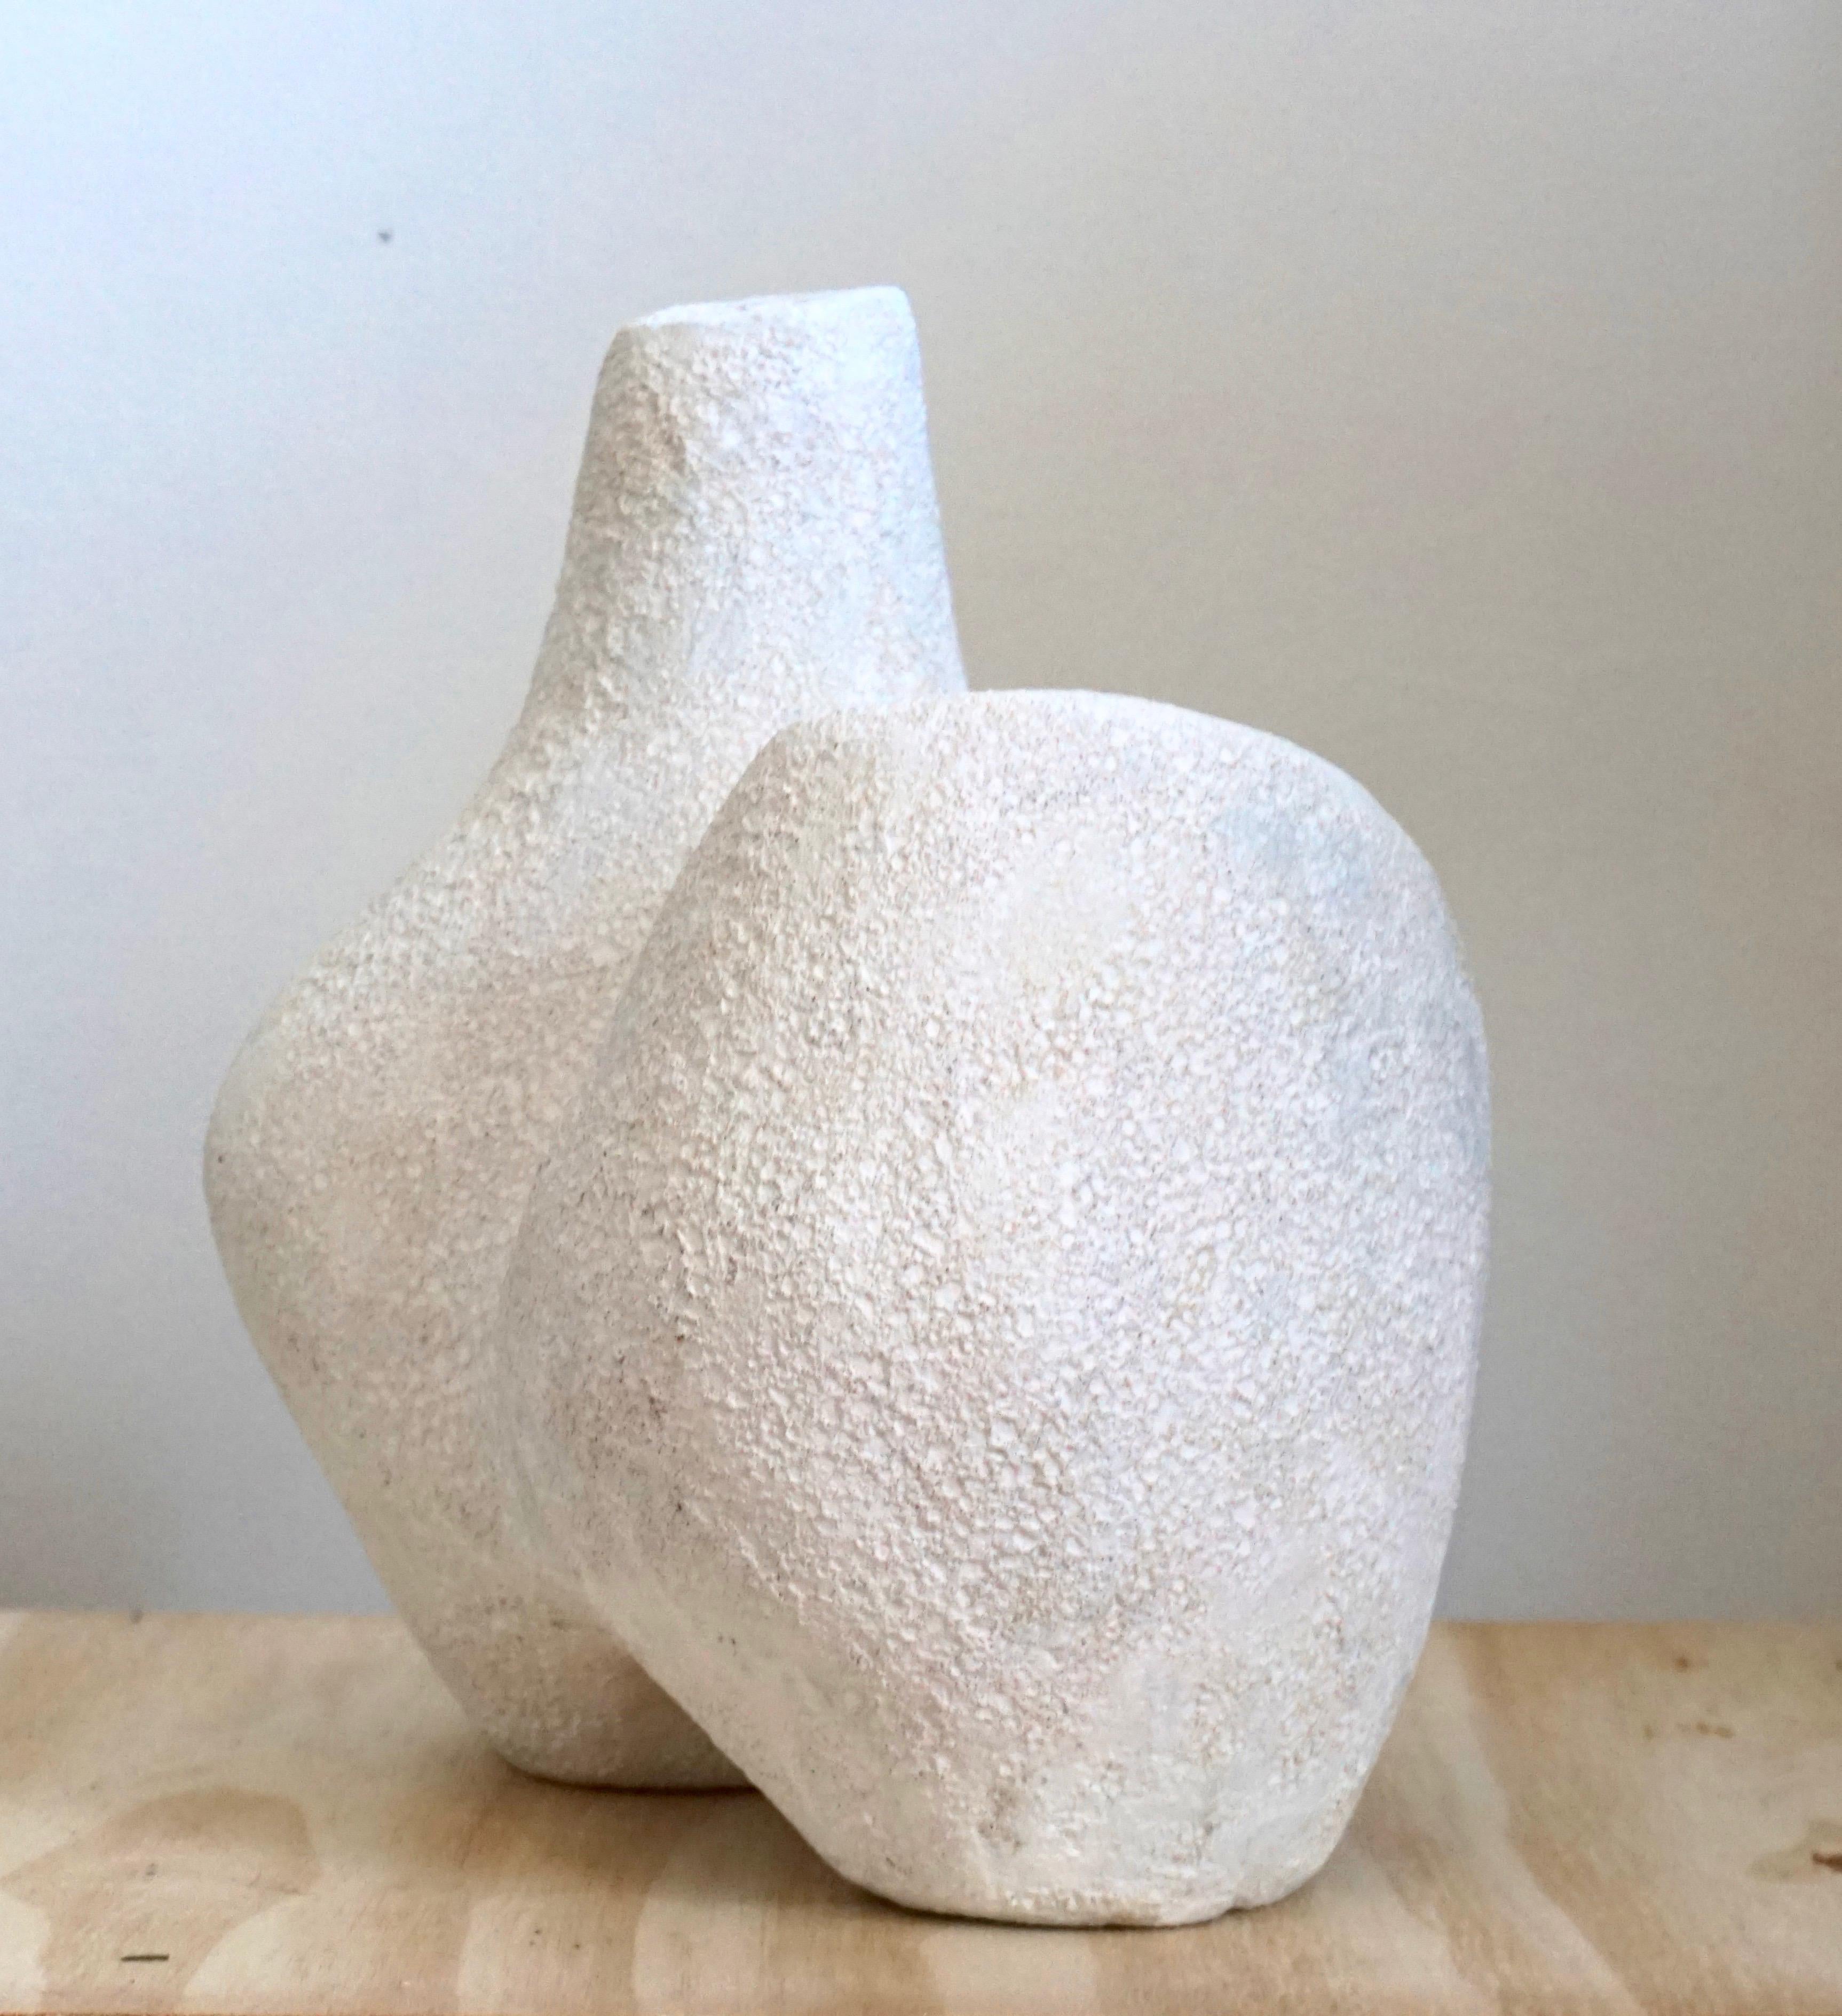 Crater vase I by Kate Butler
Dimensions: W17.8 x D26.7 x H24.1 cm
Materials: Hand sculpted, glazed pottery

Kate Butler is a writer and artist working primarily in drawing and ceramic clay. Her sculptures describe subliminal experiences of space